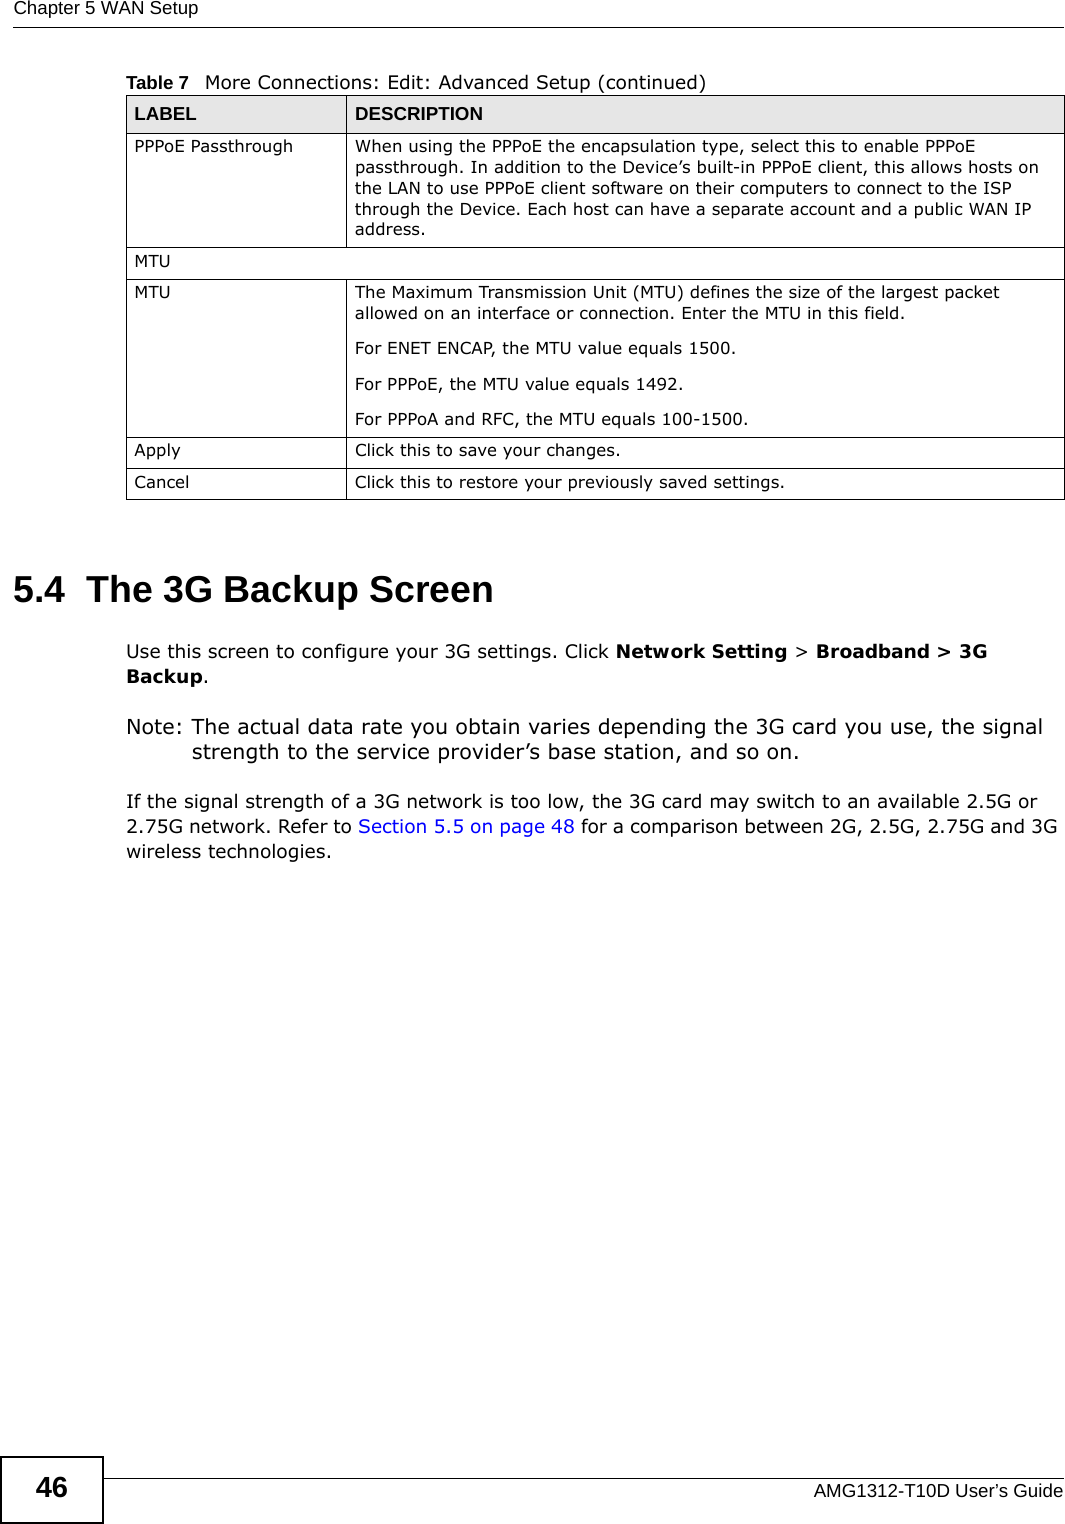 Chapter 5 WAN SetupAMG1312-T10D User’s Guide465.4  The 3G Backup ScreenUse this screen to configure your 3G settings. Click Network Setting &gt; Broadband &gt; 3G Backup.Note: The actual data rate you obtain varies depending the 3G card you use, the signal strength to the service provider’s base station, and so on.If the signal strength of a 3G network is too low, the 3G card may switch to an available 2.5G or 2.75G network. Refer to Section 5.5 on page 48 for a comparison between 2G, 2.5G, 2.75G and 3G wireless technologies.PPPoE Passthrough When using the PPPoE the encapsulation type, select this to enable PPPoE passthrough. In addition to the Device’s built-in PPPoE client, this allows hosts on the LAN to use PPPoE client software on their computers to connect to the ISP through the Device. Each host can have a separate account and a public WAN IP address.MTUMTU The Maximum Transmission Unit (MTU) defines the size of the largest packet allowed on an interface or connection. Enter the MTU in this field.For ENET ENCAP, the MTU value equals 1500.For PPPoE, the MTU value equals 1492.For PPPoA and RFC, the MTU equals 100-1500.Apply Click this to save your changes. Cancel Click this to restore your previously saved settings.Table 7   More Connections: Edit: Advanced Setup (continued)LABEL DESCRIPTION